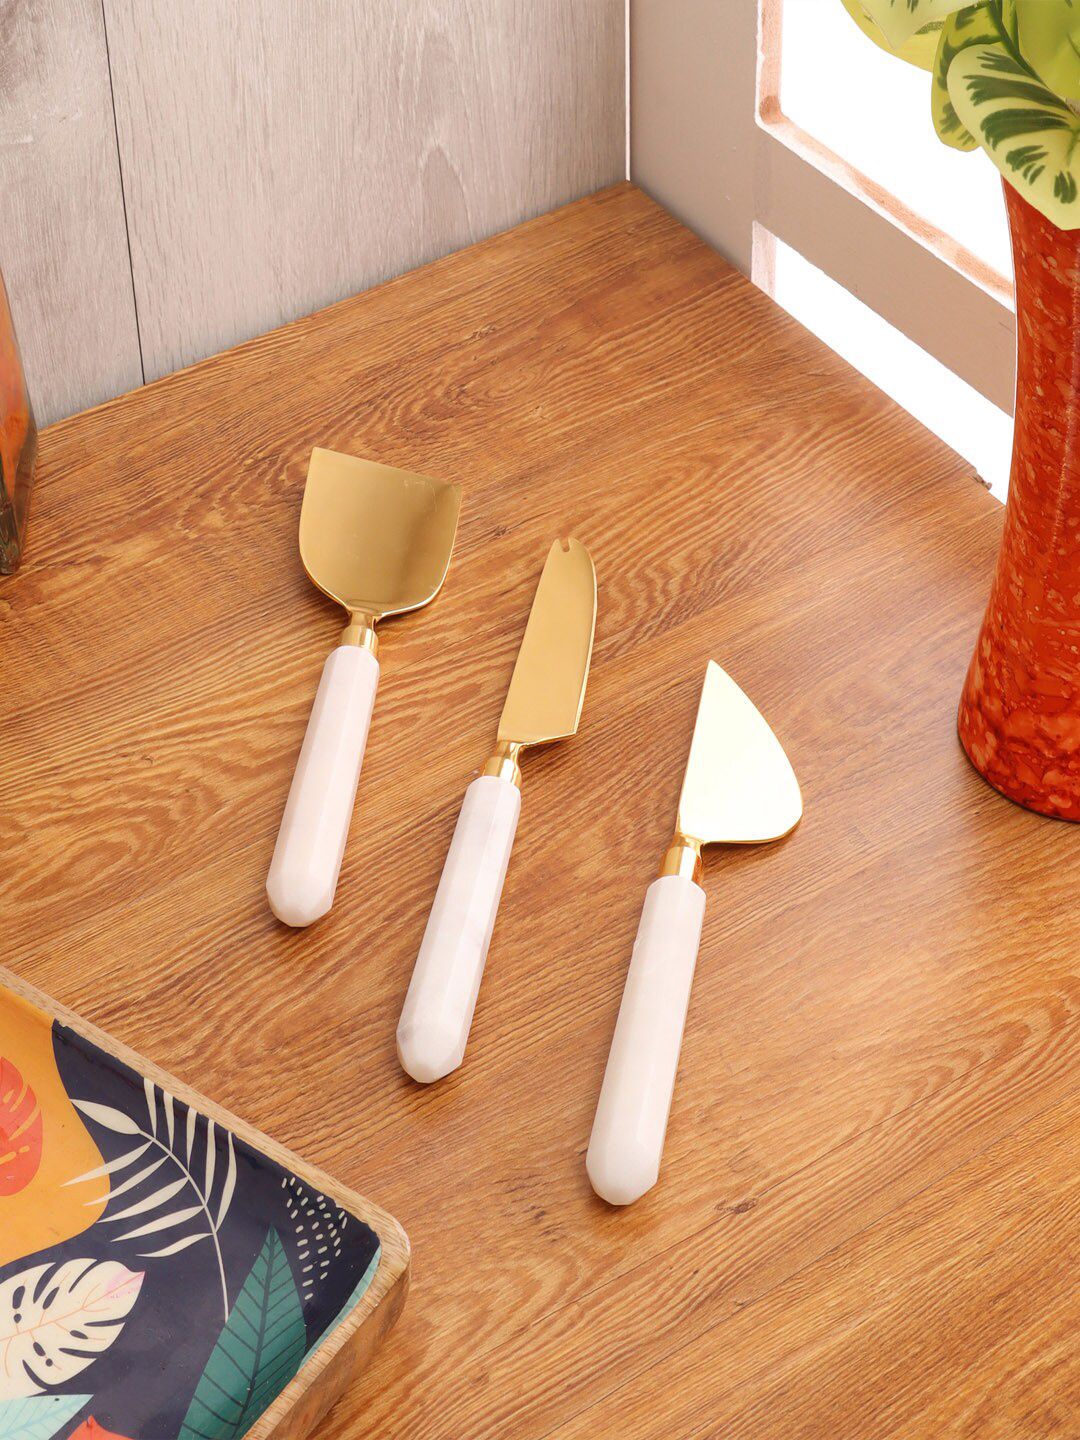 NikkisPride Set Of 3 Gold-Toned Cheese Server Set Price in India